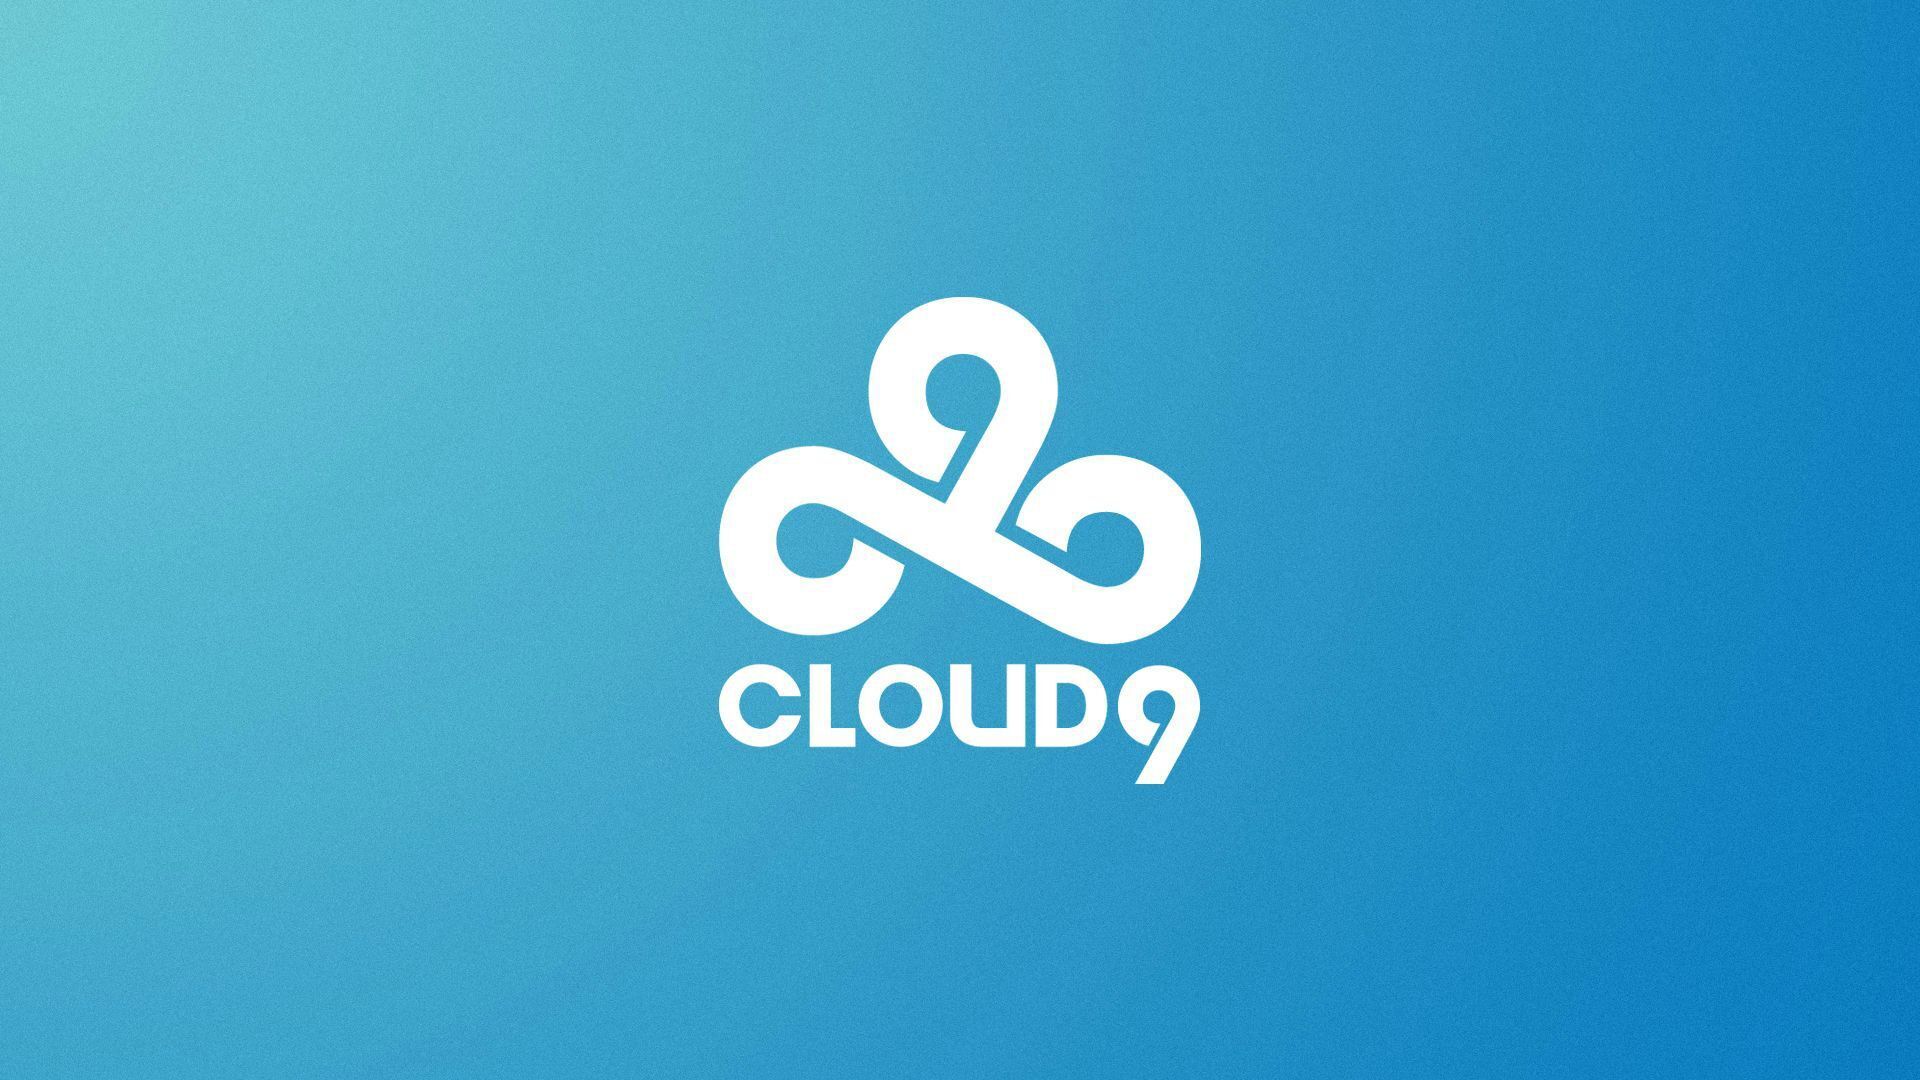 Cloud9's CS:GO team has signed René “Cajunb” Borg, formerly of OpTic Gaming. (Image courtesy of Cloud9)